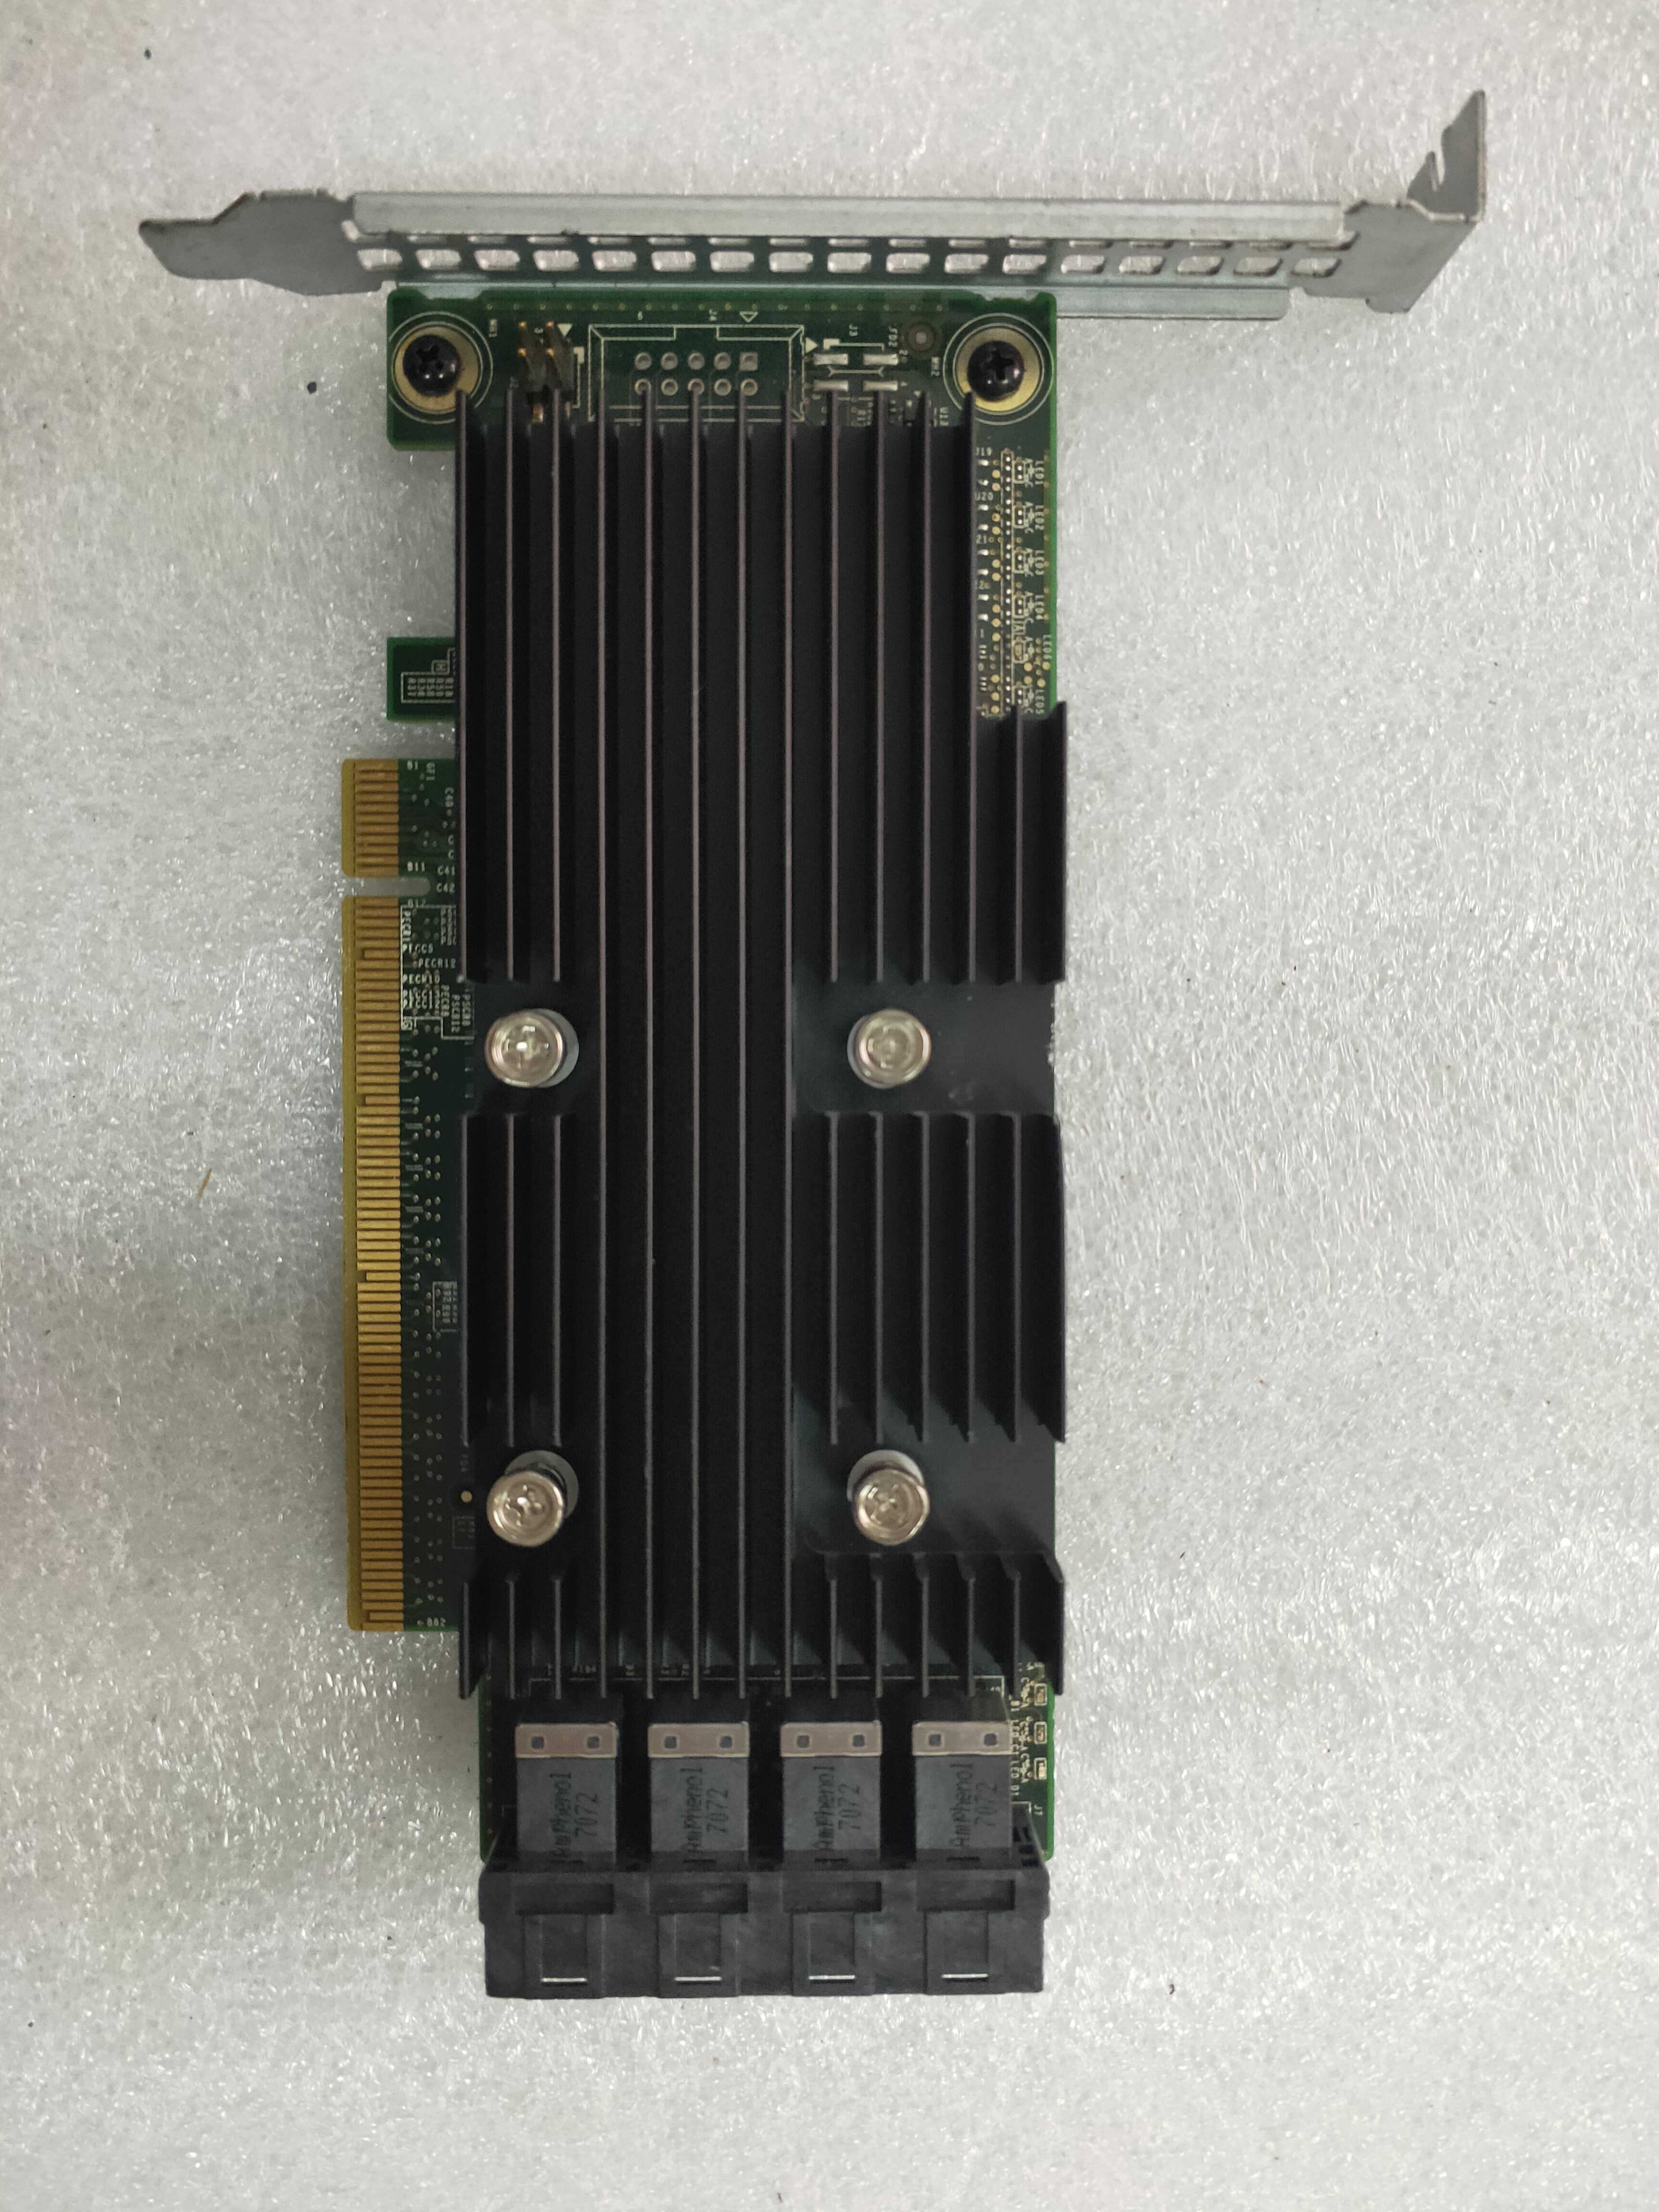 DELL R730XD R930 server PCI-E quad channel card solid state management card 0P31H2 GY1TD